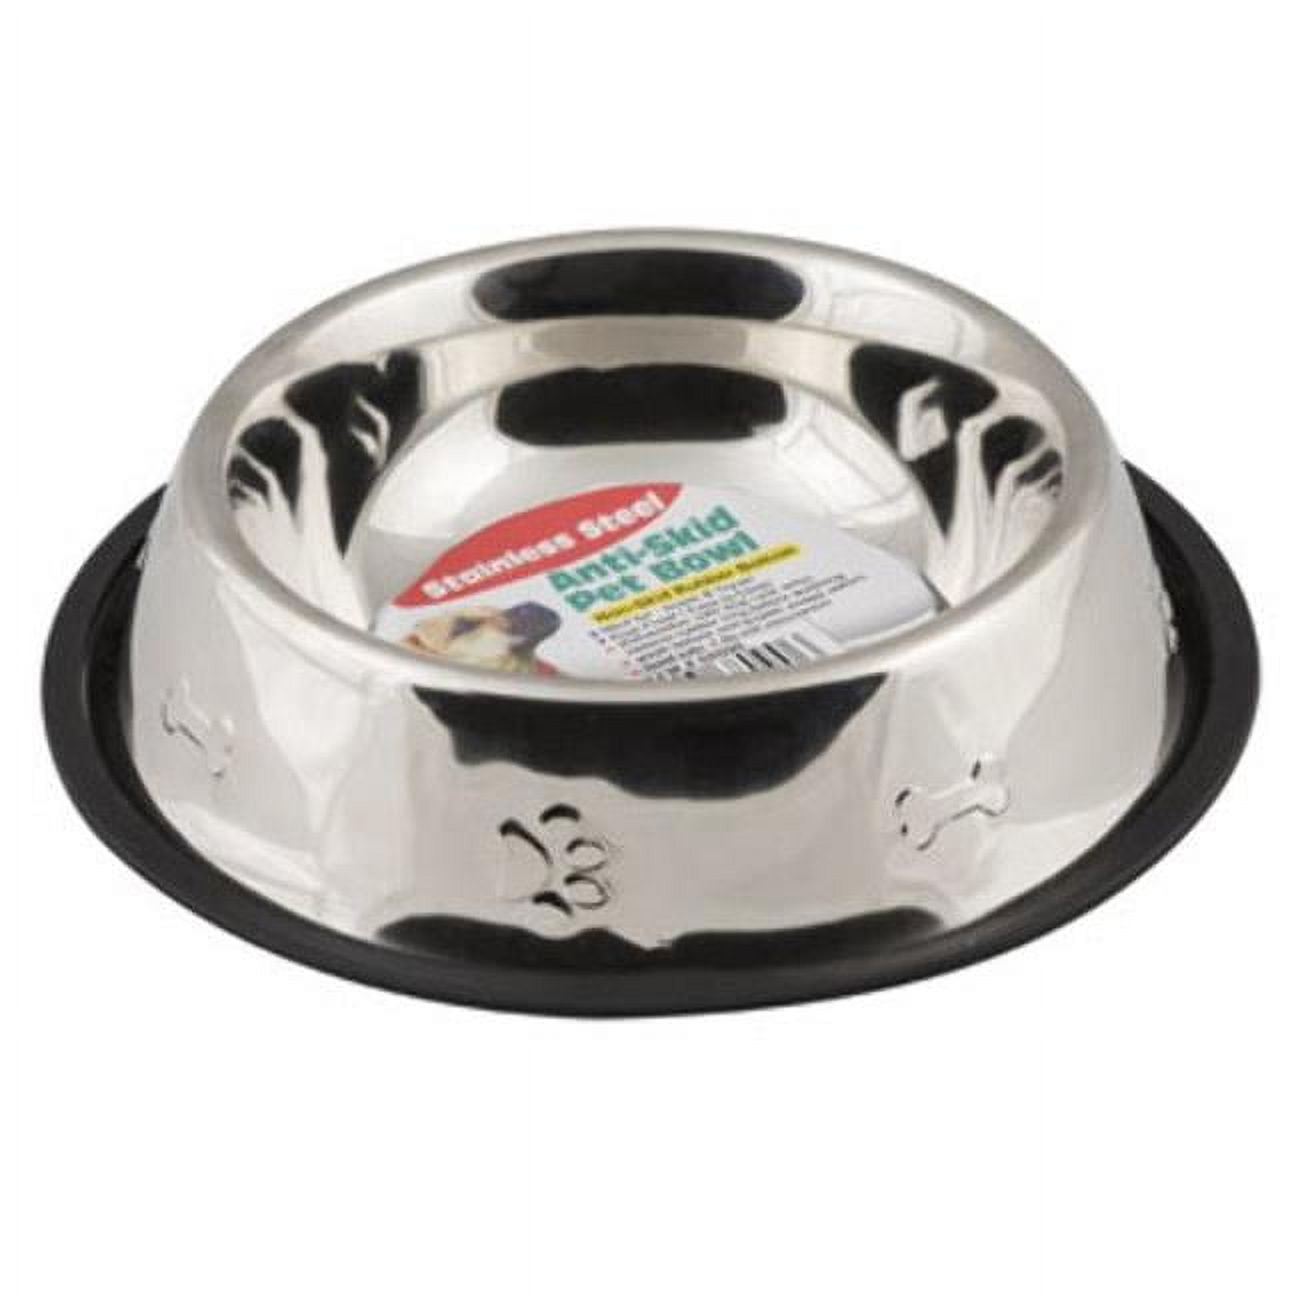 Picture of DDI 2324885 64 oz Stainless Steel Pet Bowl, Silver - Case of 12 - 12 Per Pack